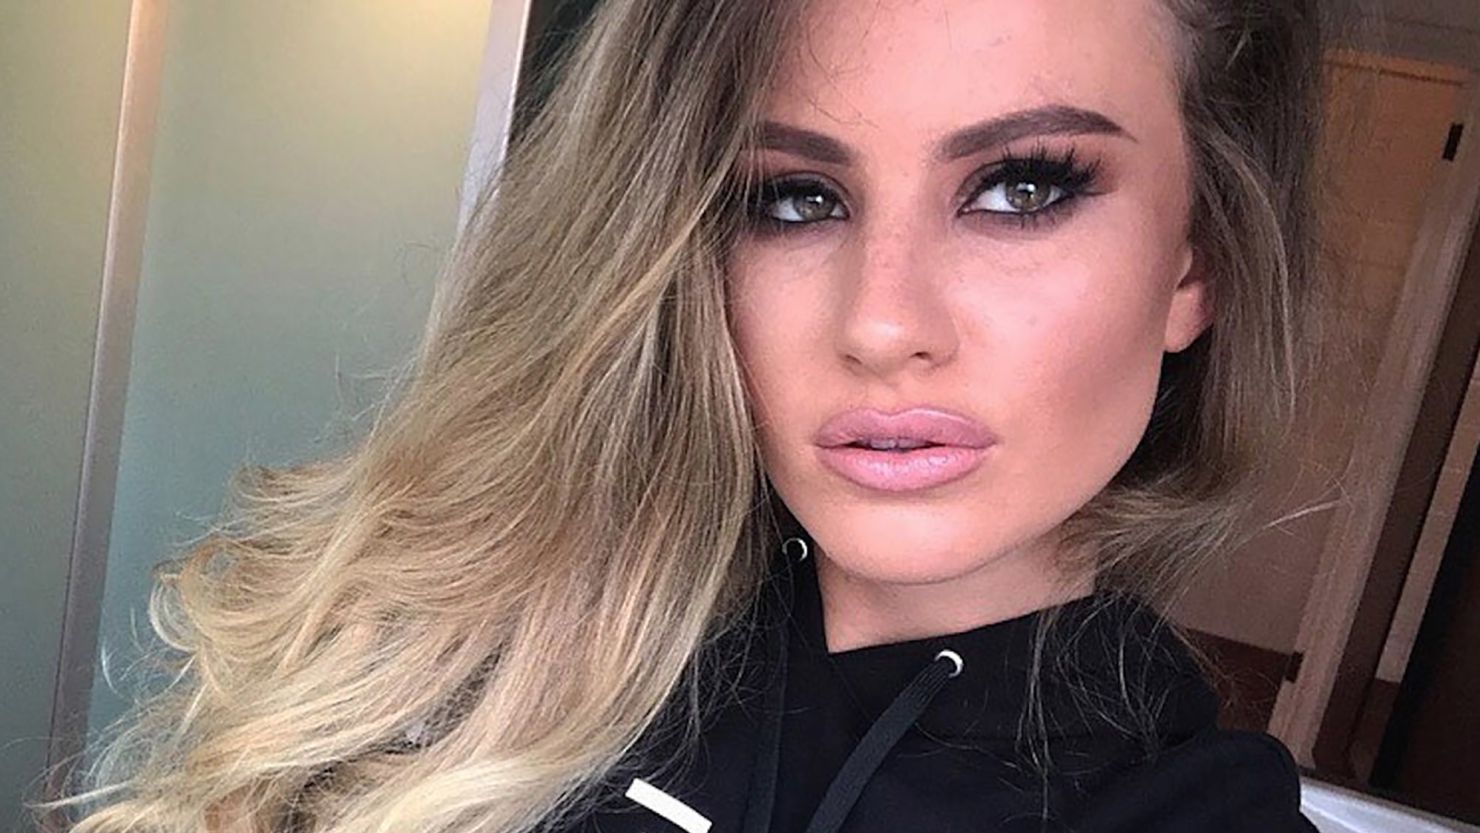 British model Chloe Ayling insists she was not an accomplice in her kidnapping.